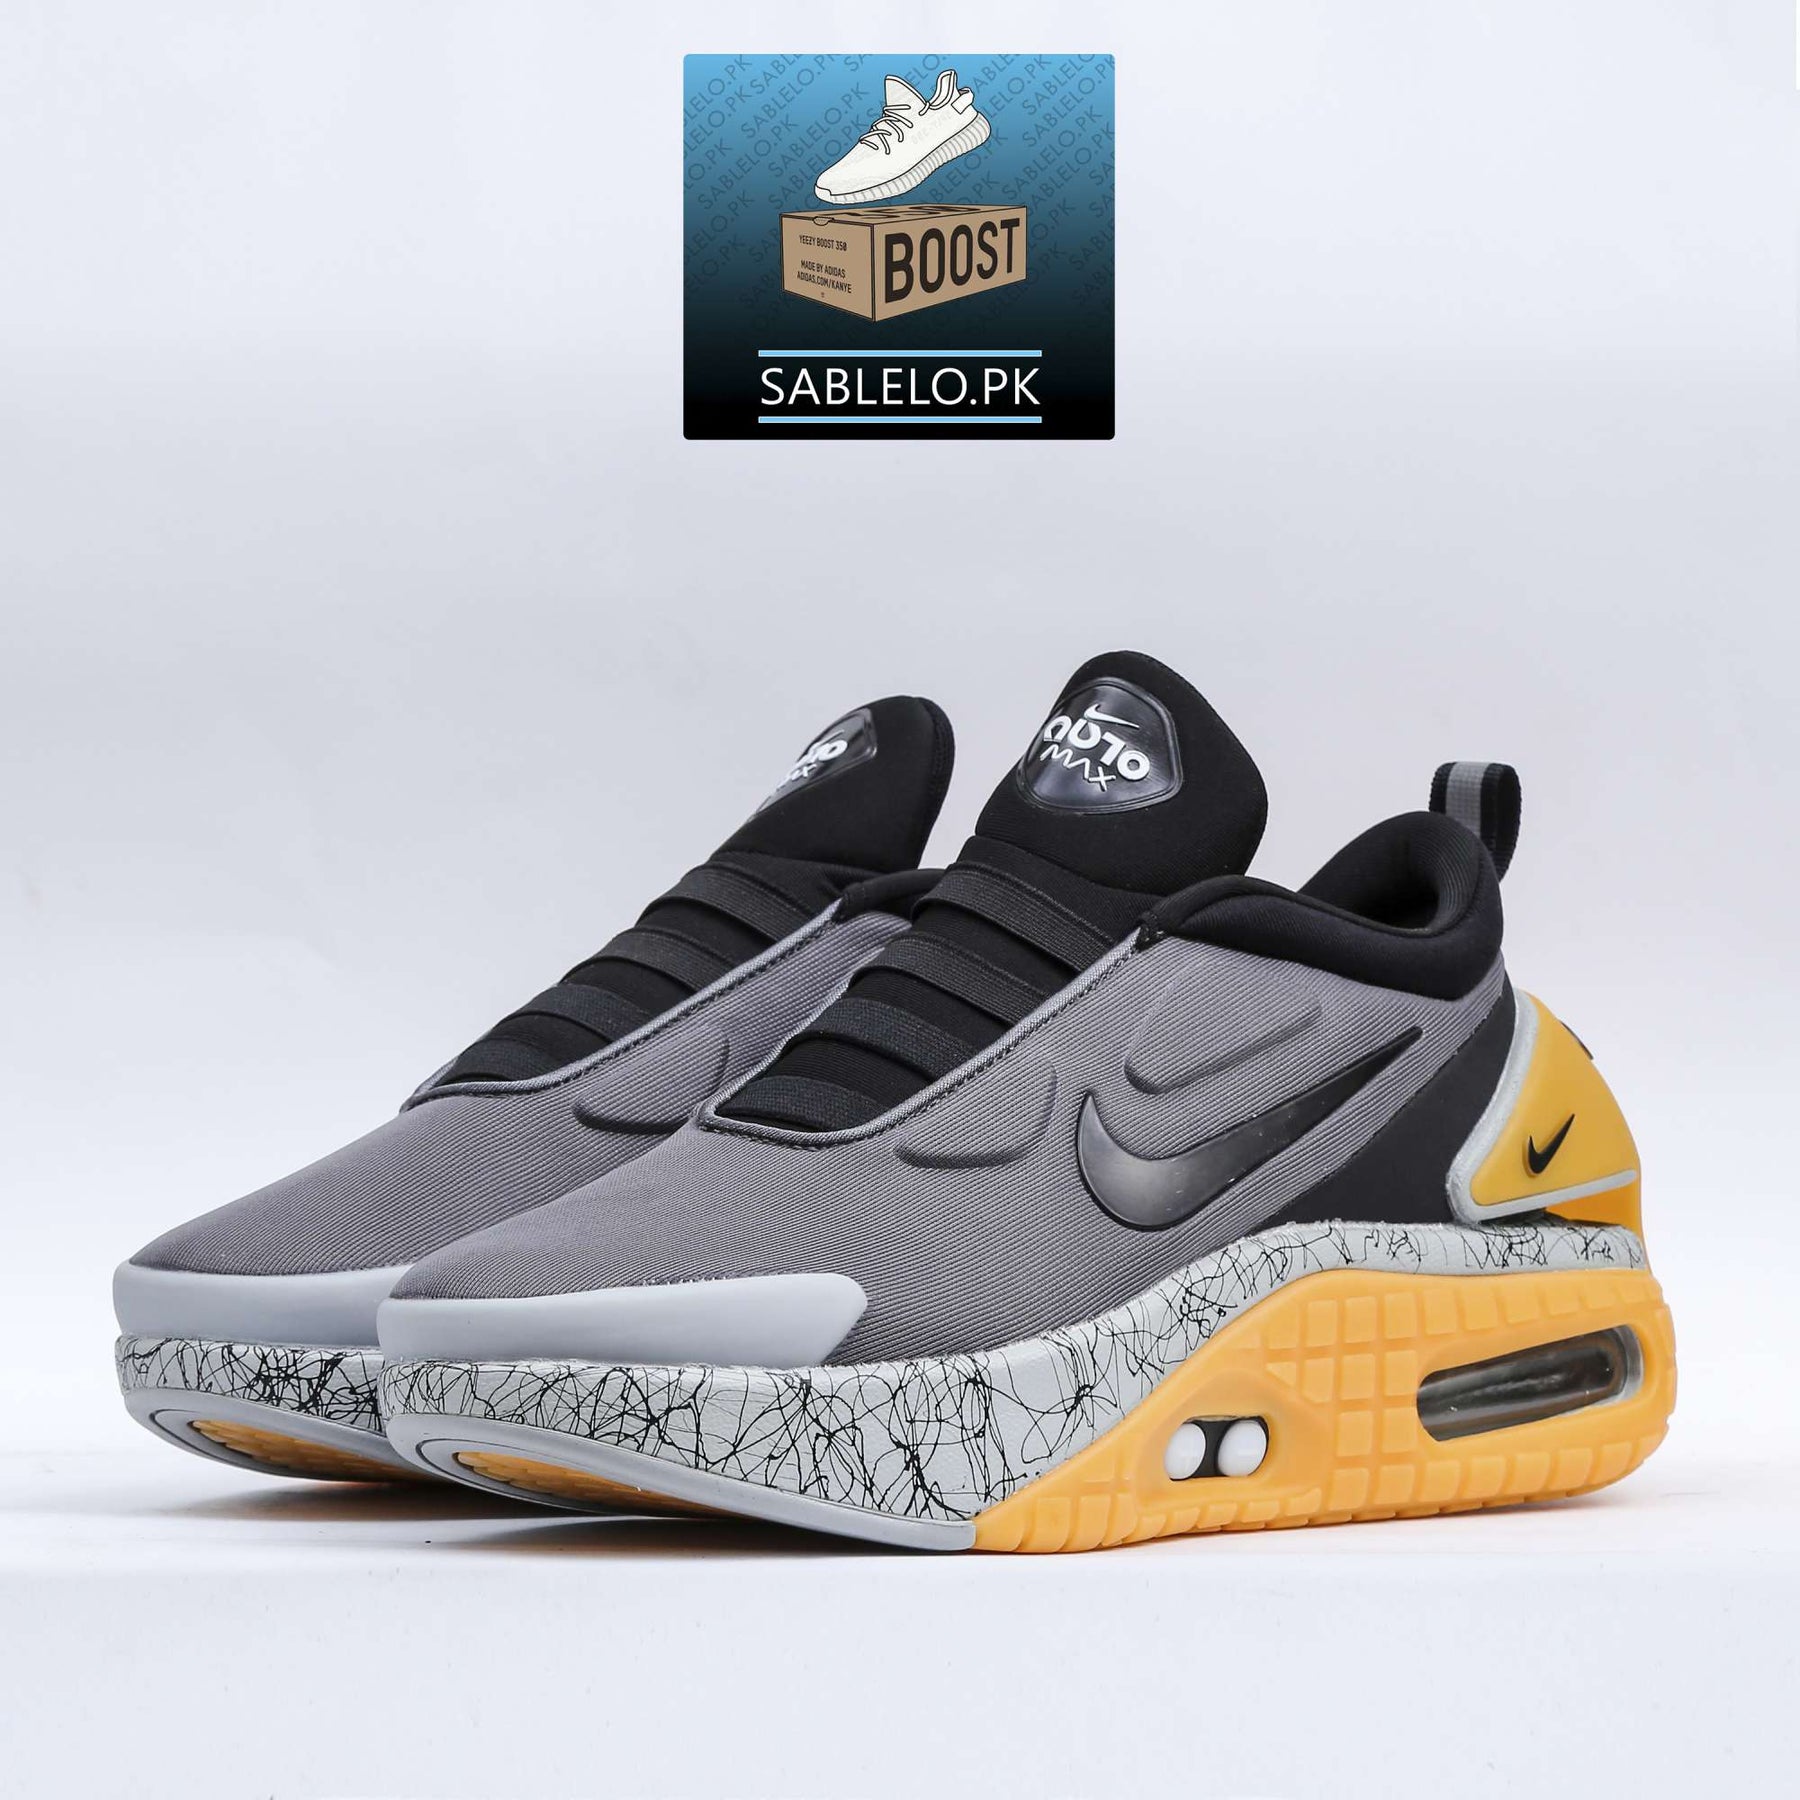 Nike Adobt Auto Max Gray Orange - Premium Shoes from perfectshop - Just Rs.8999! Shop now at Sablelo.pk